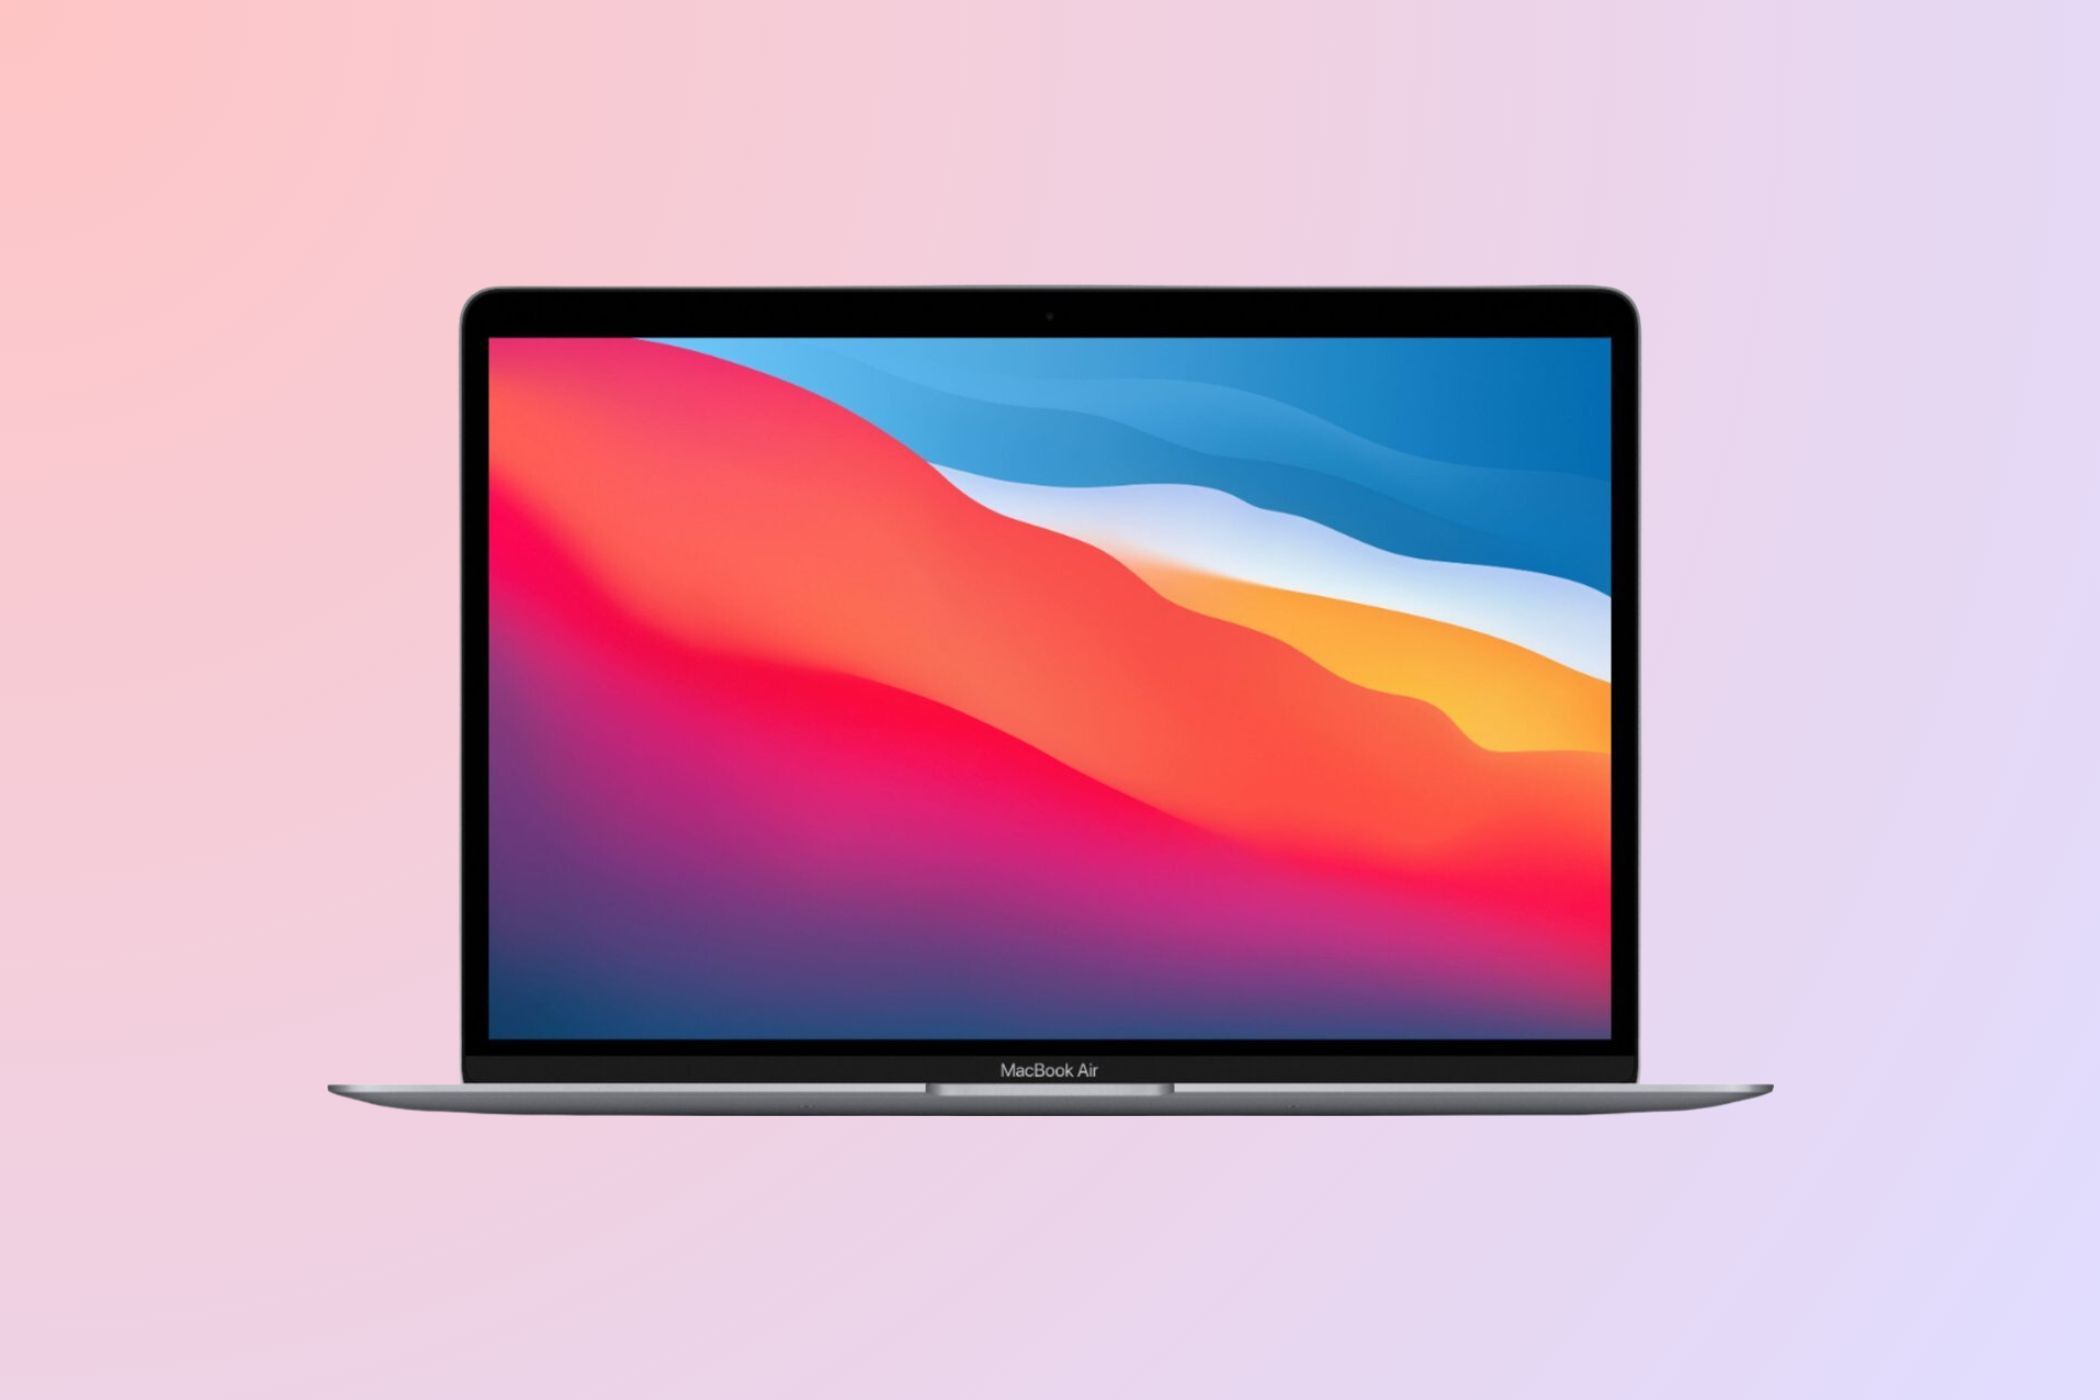 MacBook Air with M1 chip on pink background